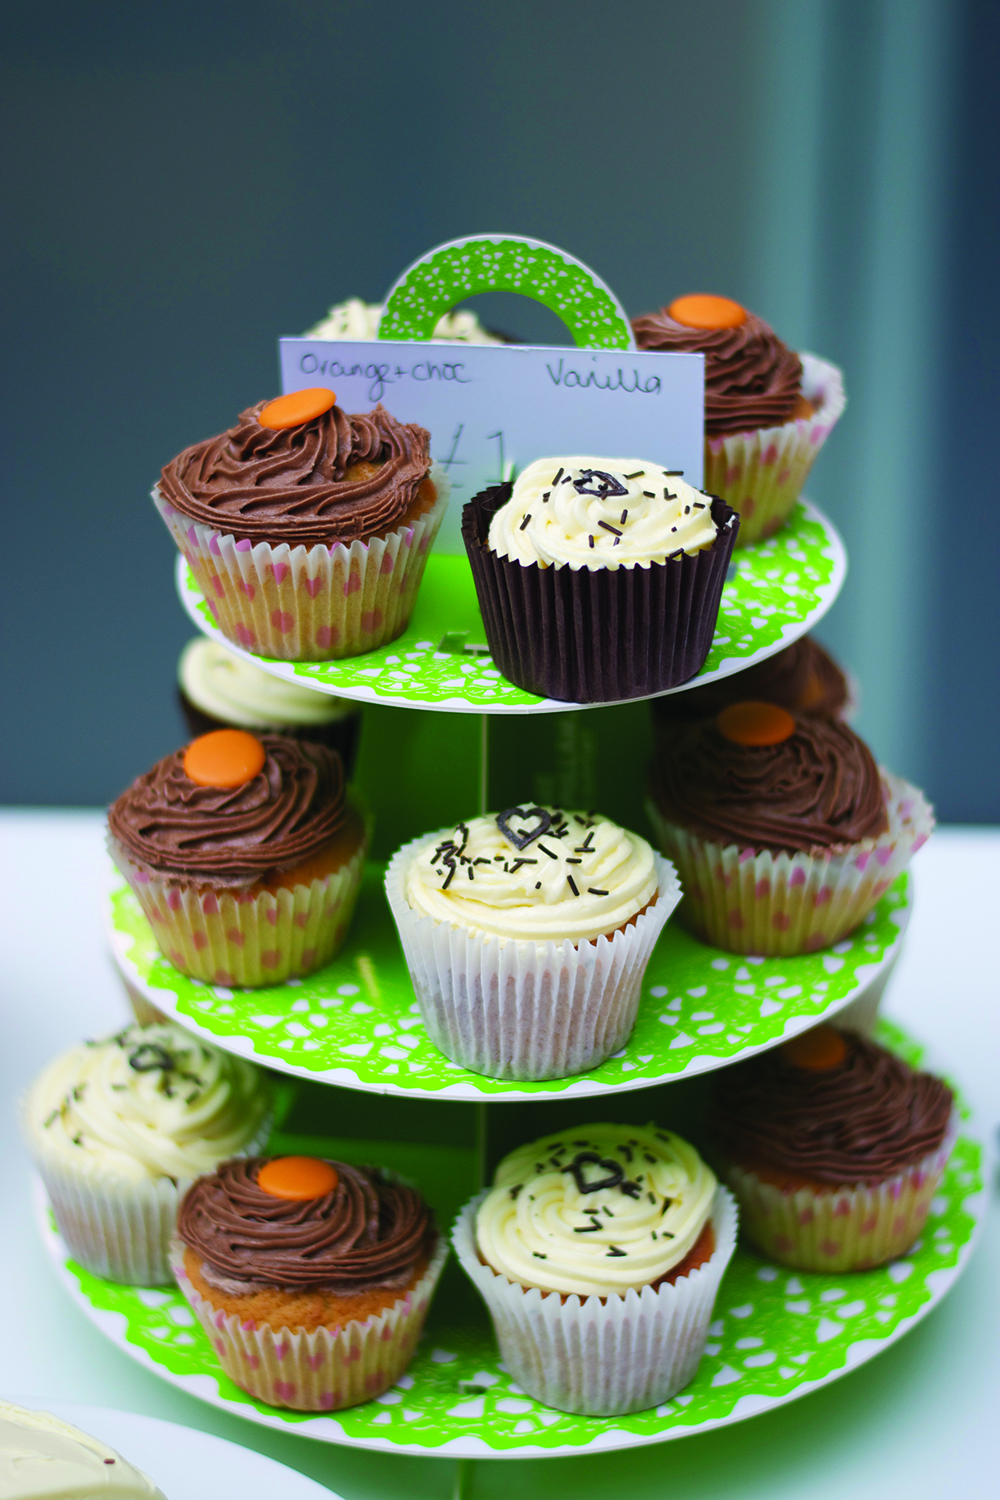 MacMillan Cancer Support Charity Cake Sale